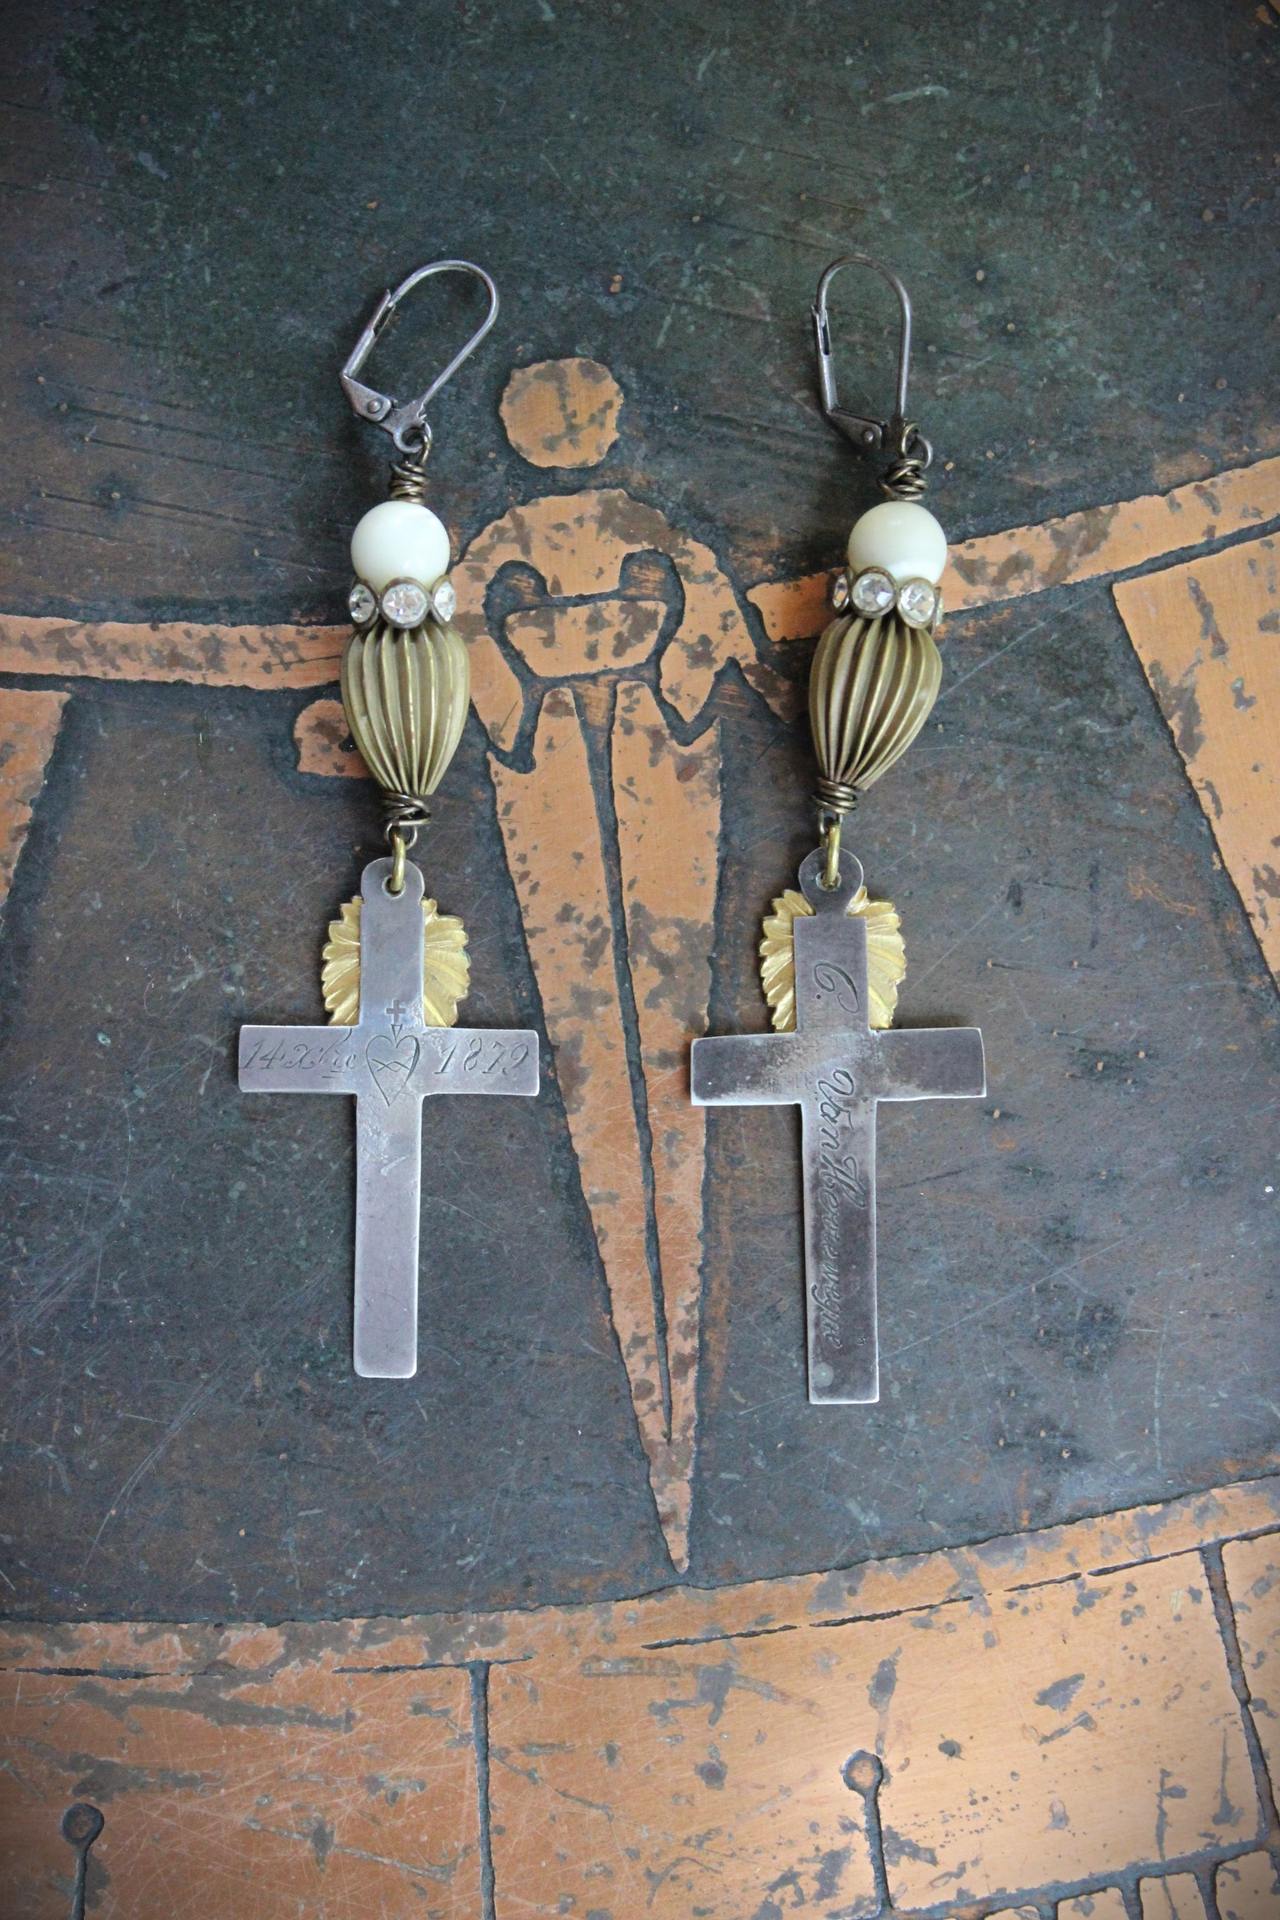 NEW! Antique French Sterling Engraved Nun's Cross Earrings w/Gold Leaf Mary and Jesus Findings, Antique Rhinestone Rondelles, Sterling Earring Wires